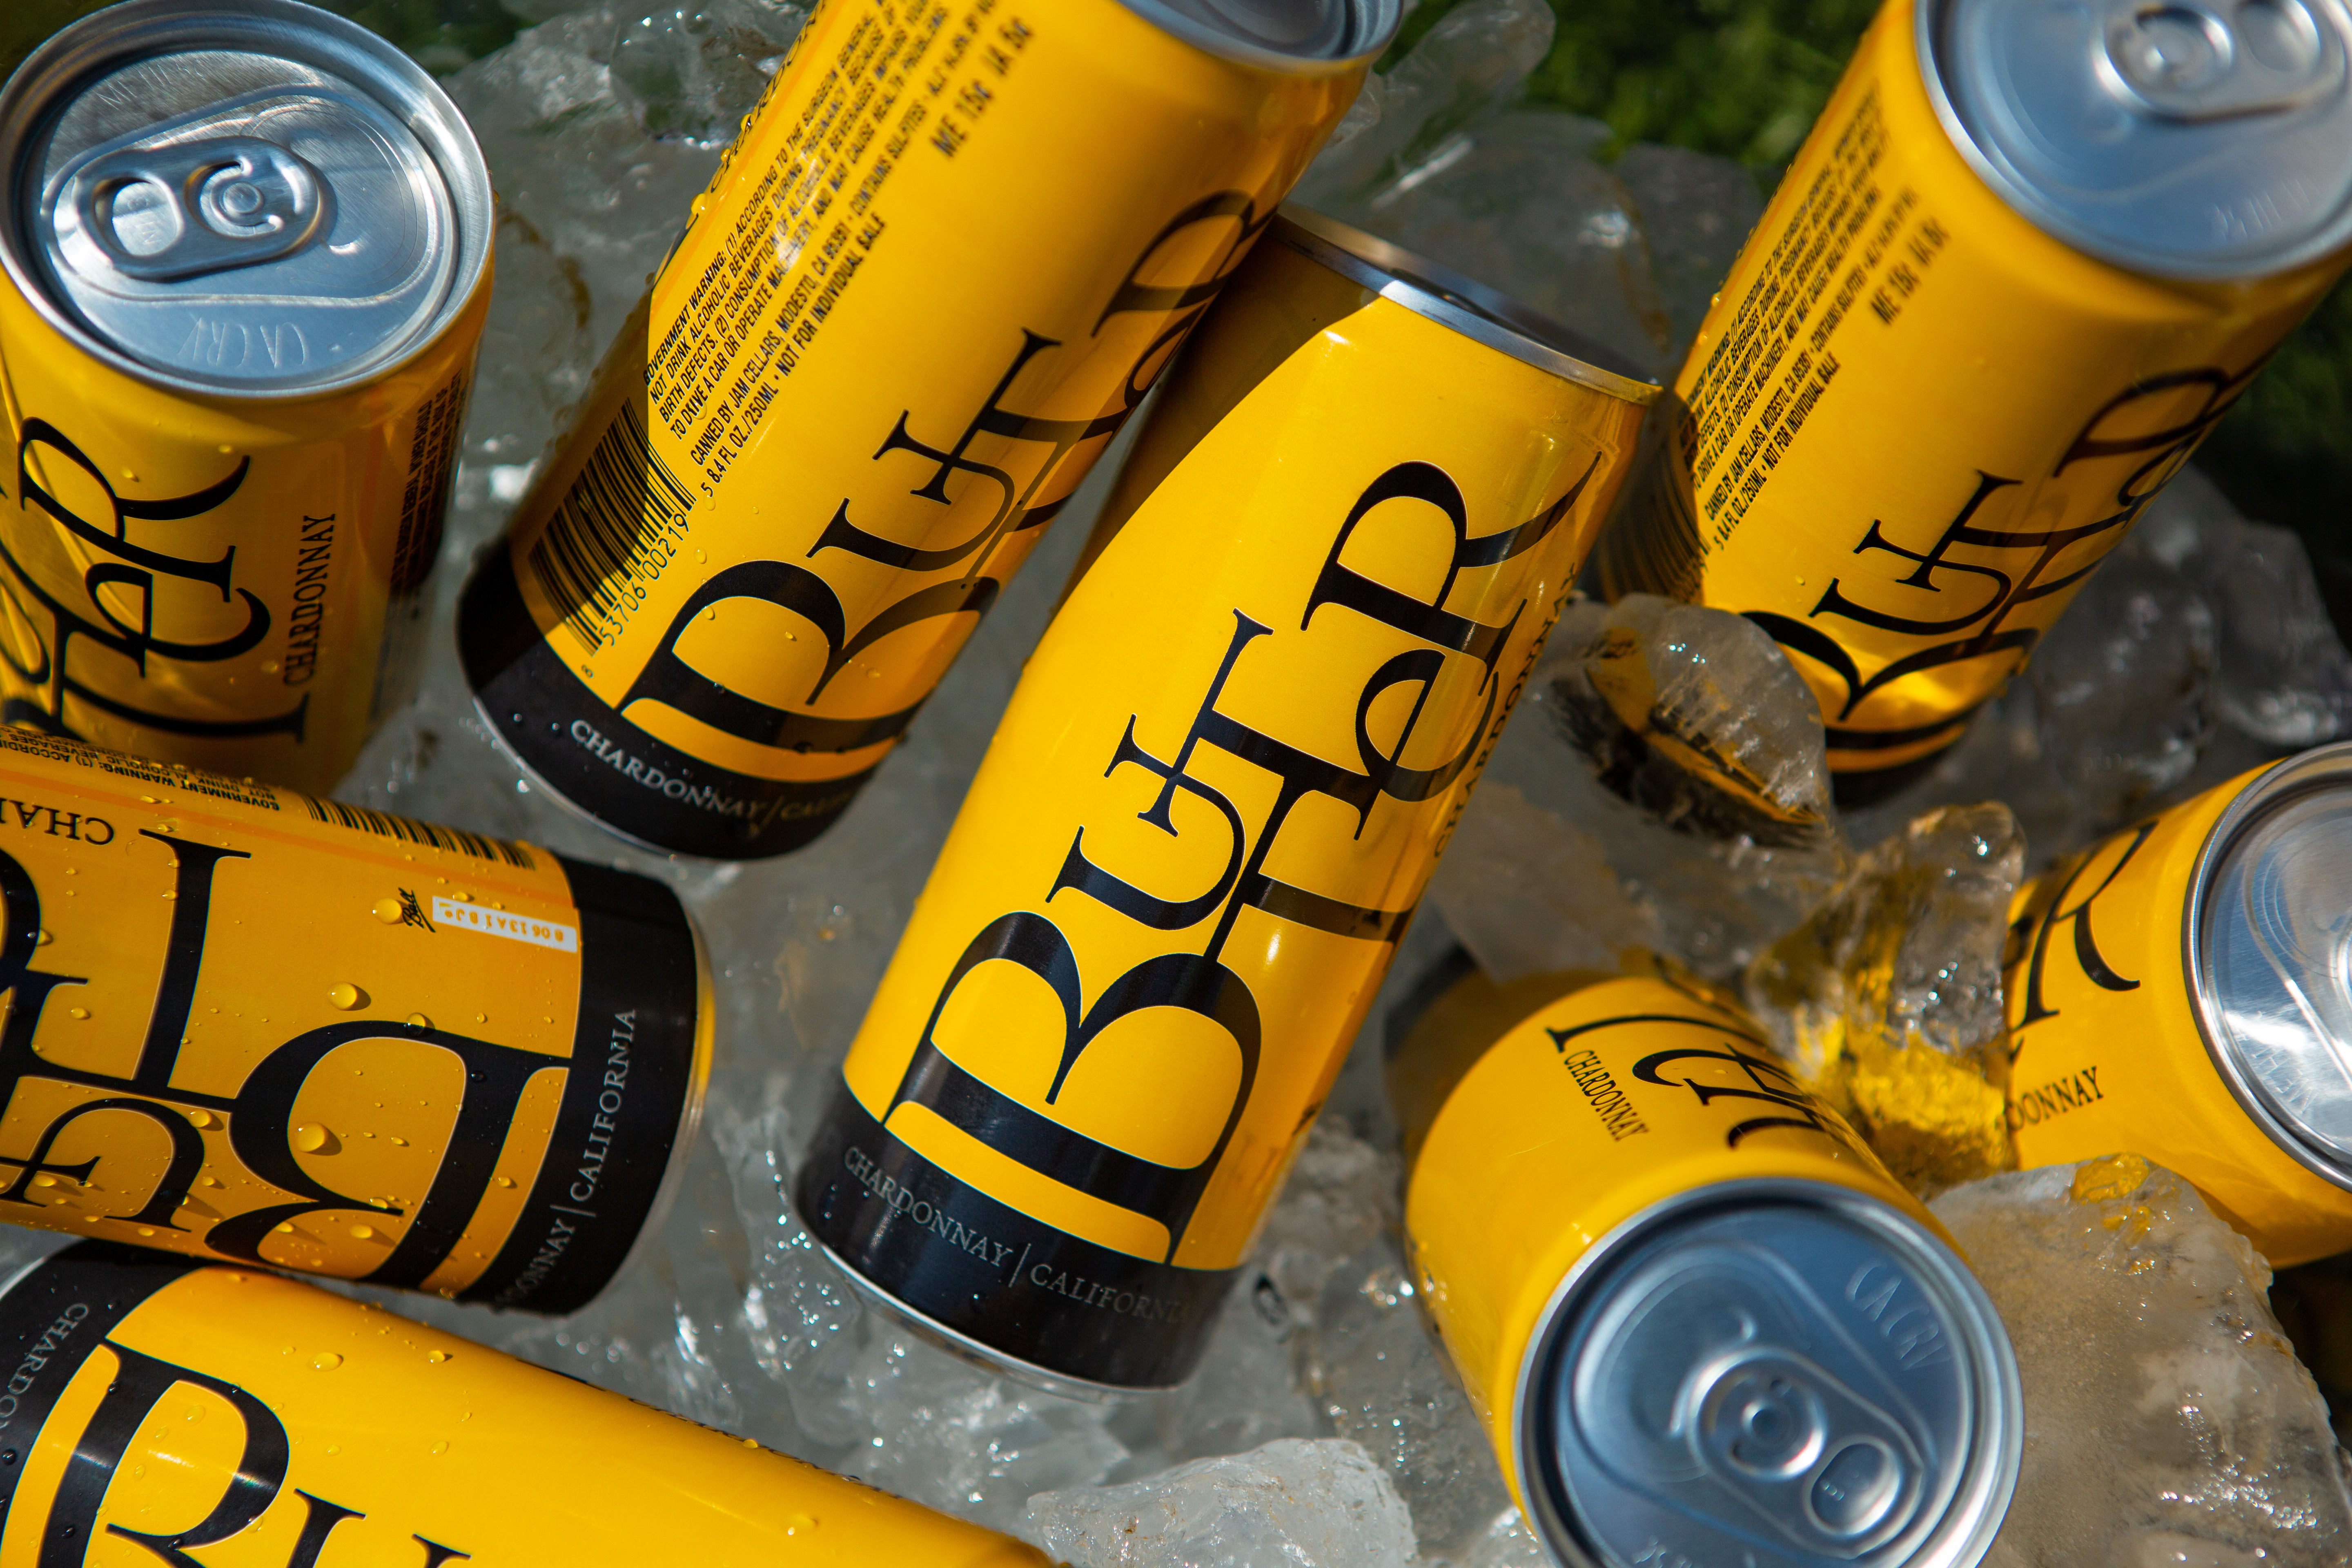 Decanter: How Good is Canned Wine?